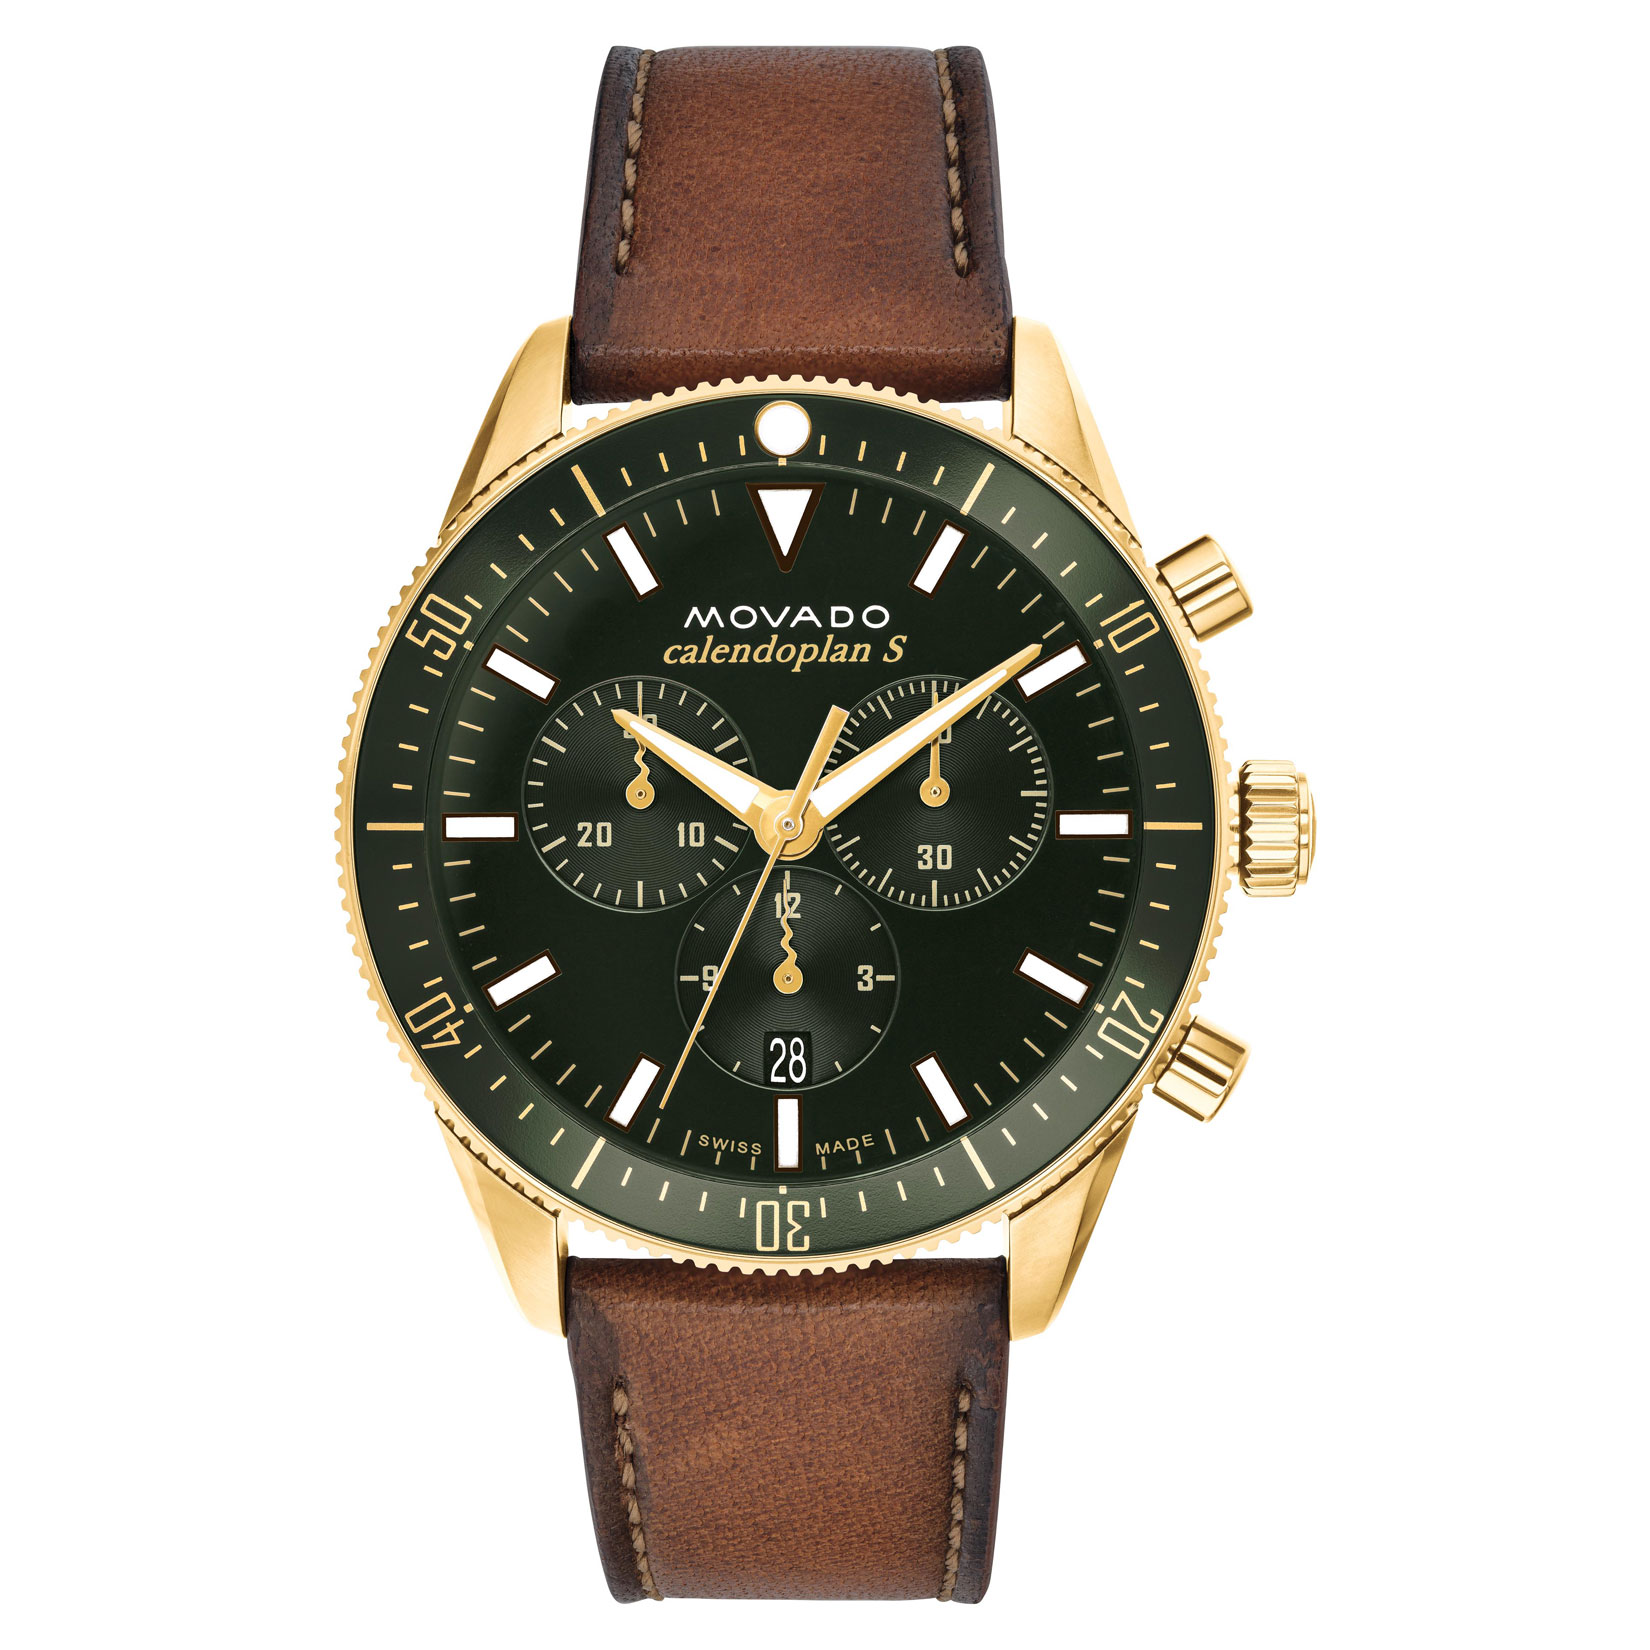 Heritage Calendoplan S Green Dial Leather Strap Watch | 42mm | - Movado 3650122